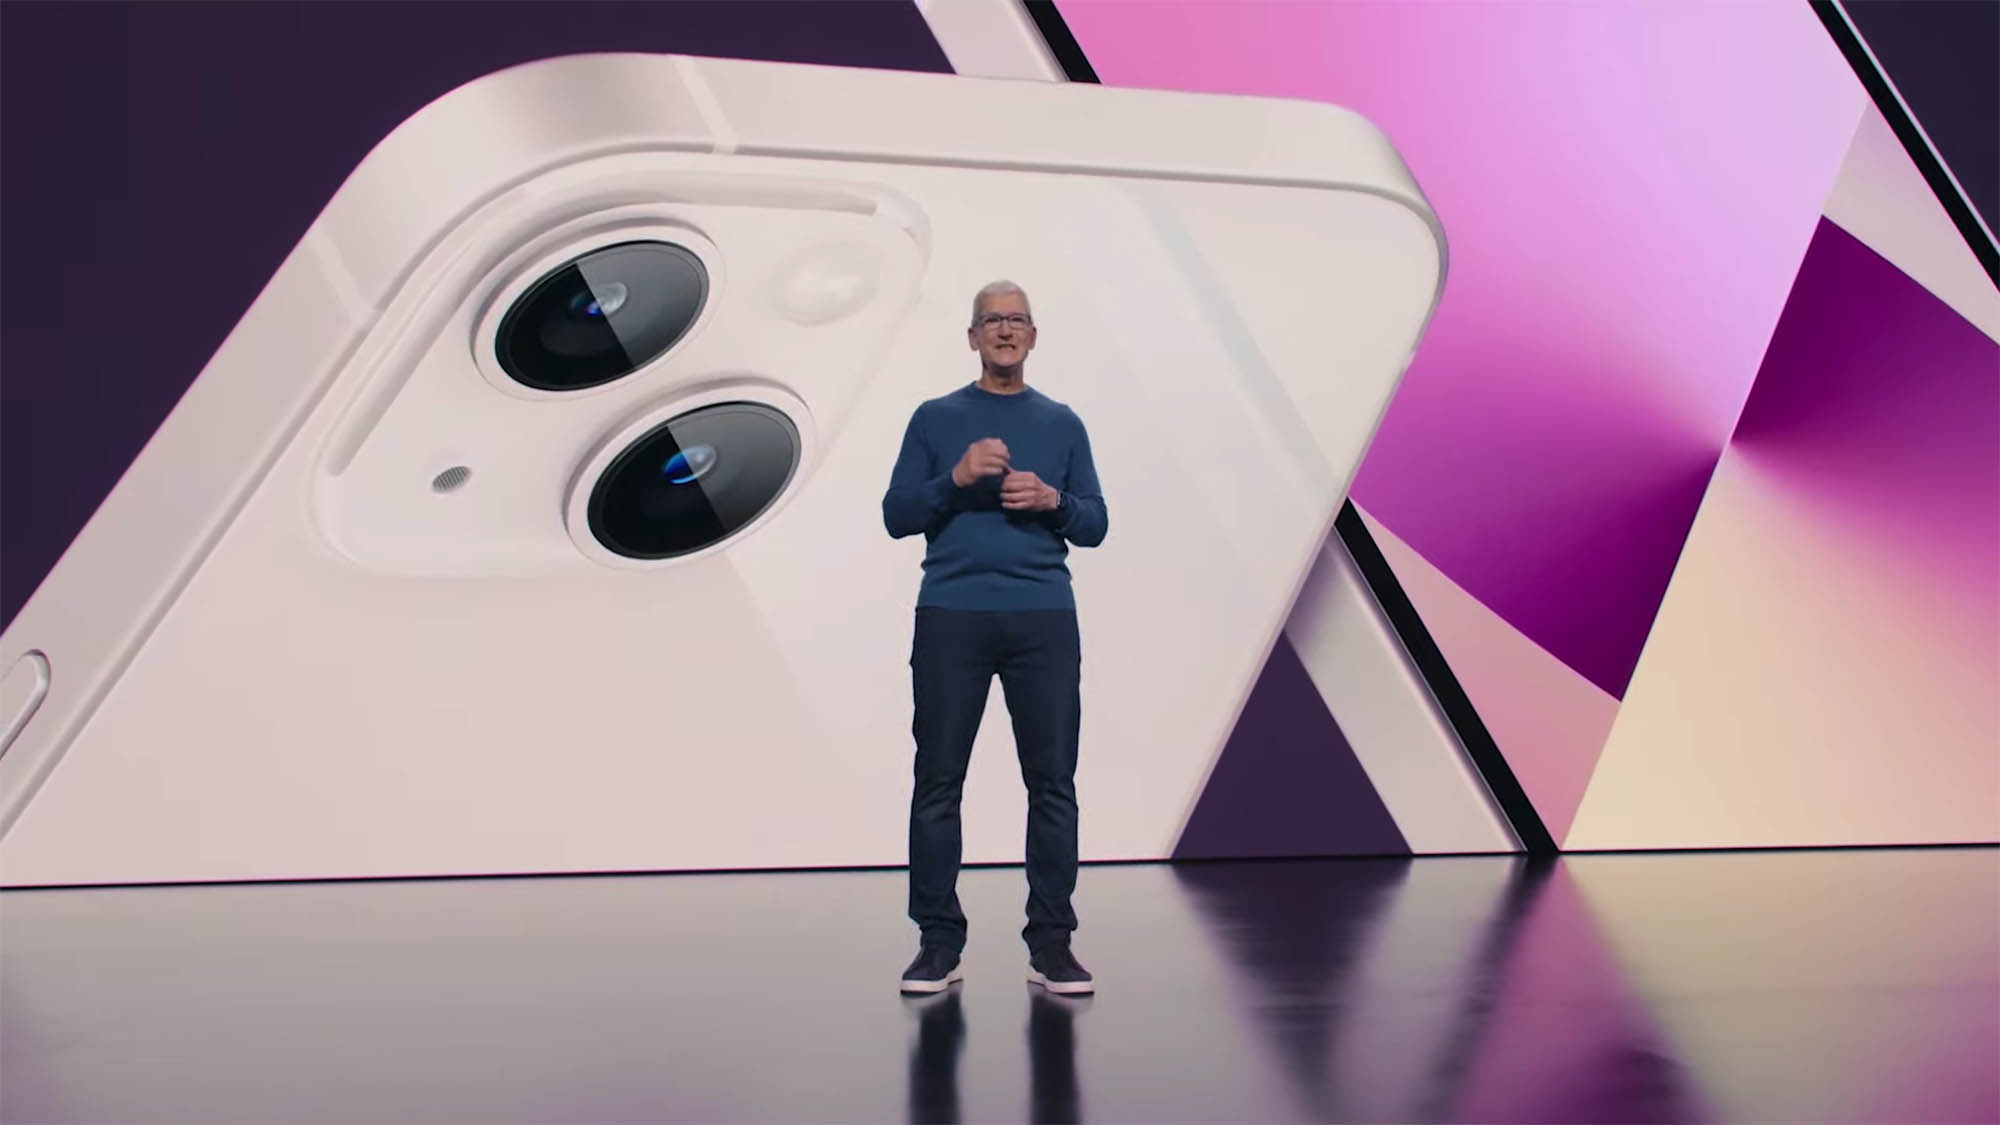 Tim Cook unveiling the iPhone 13 at Apple's California Streaming event in September 2021.